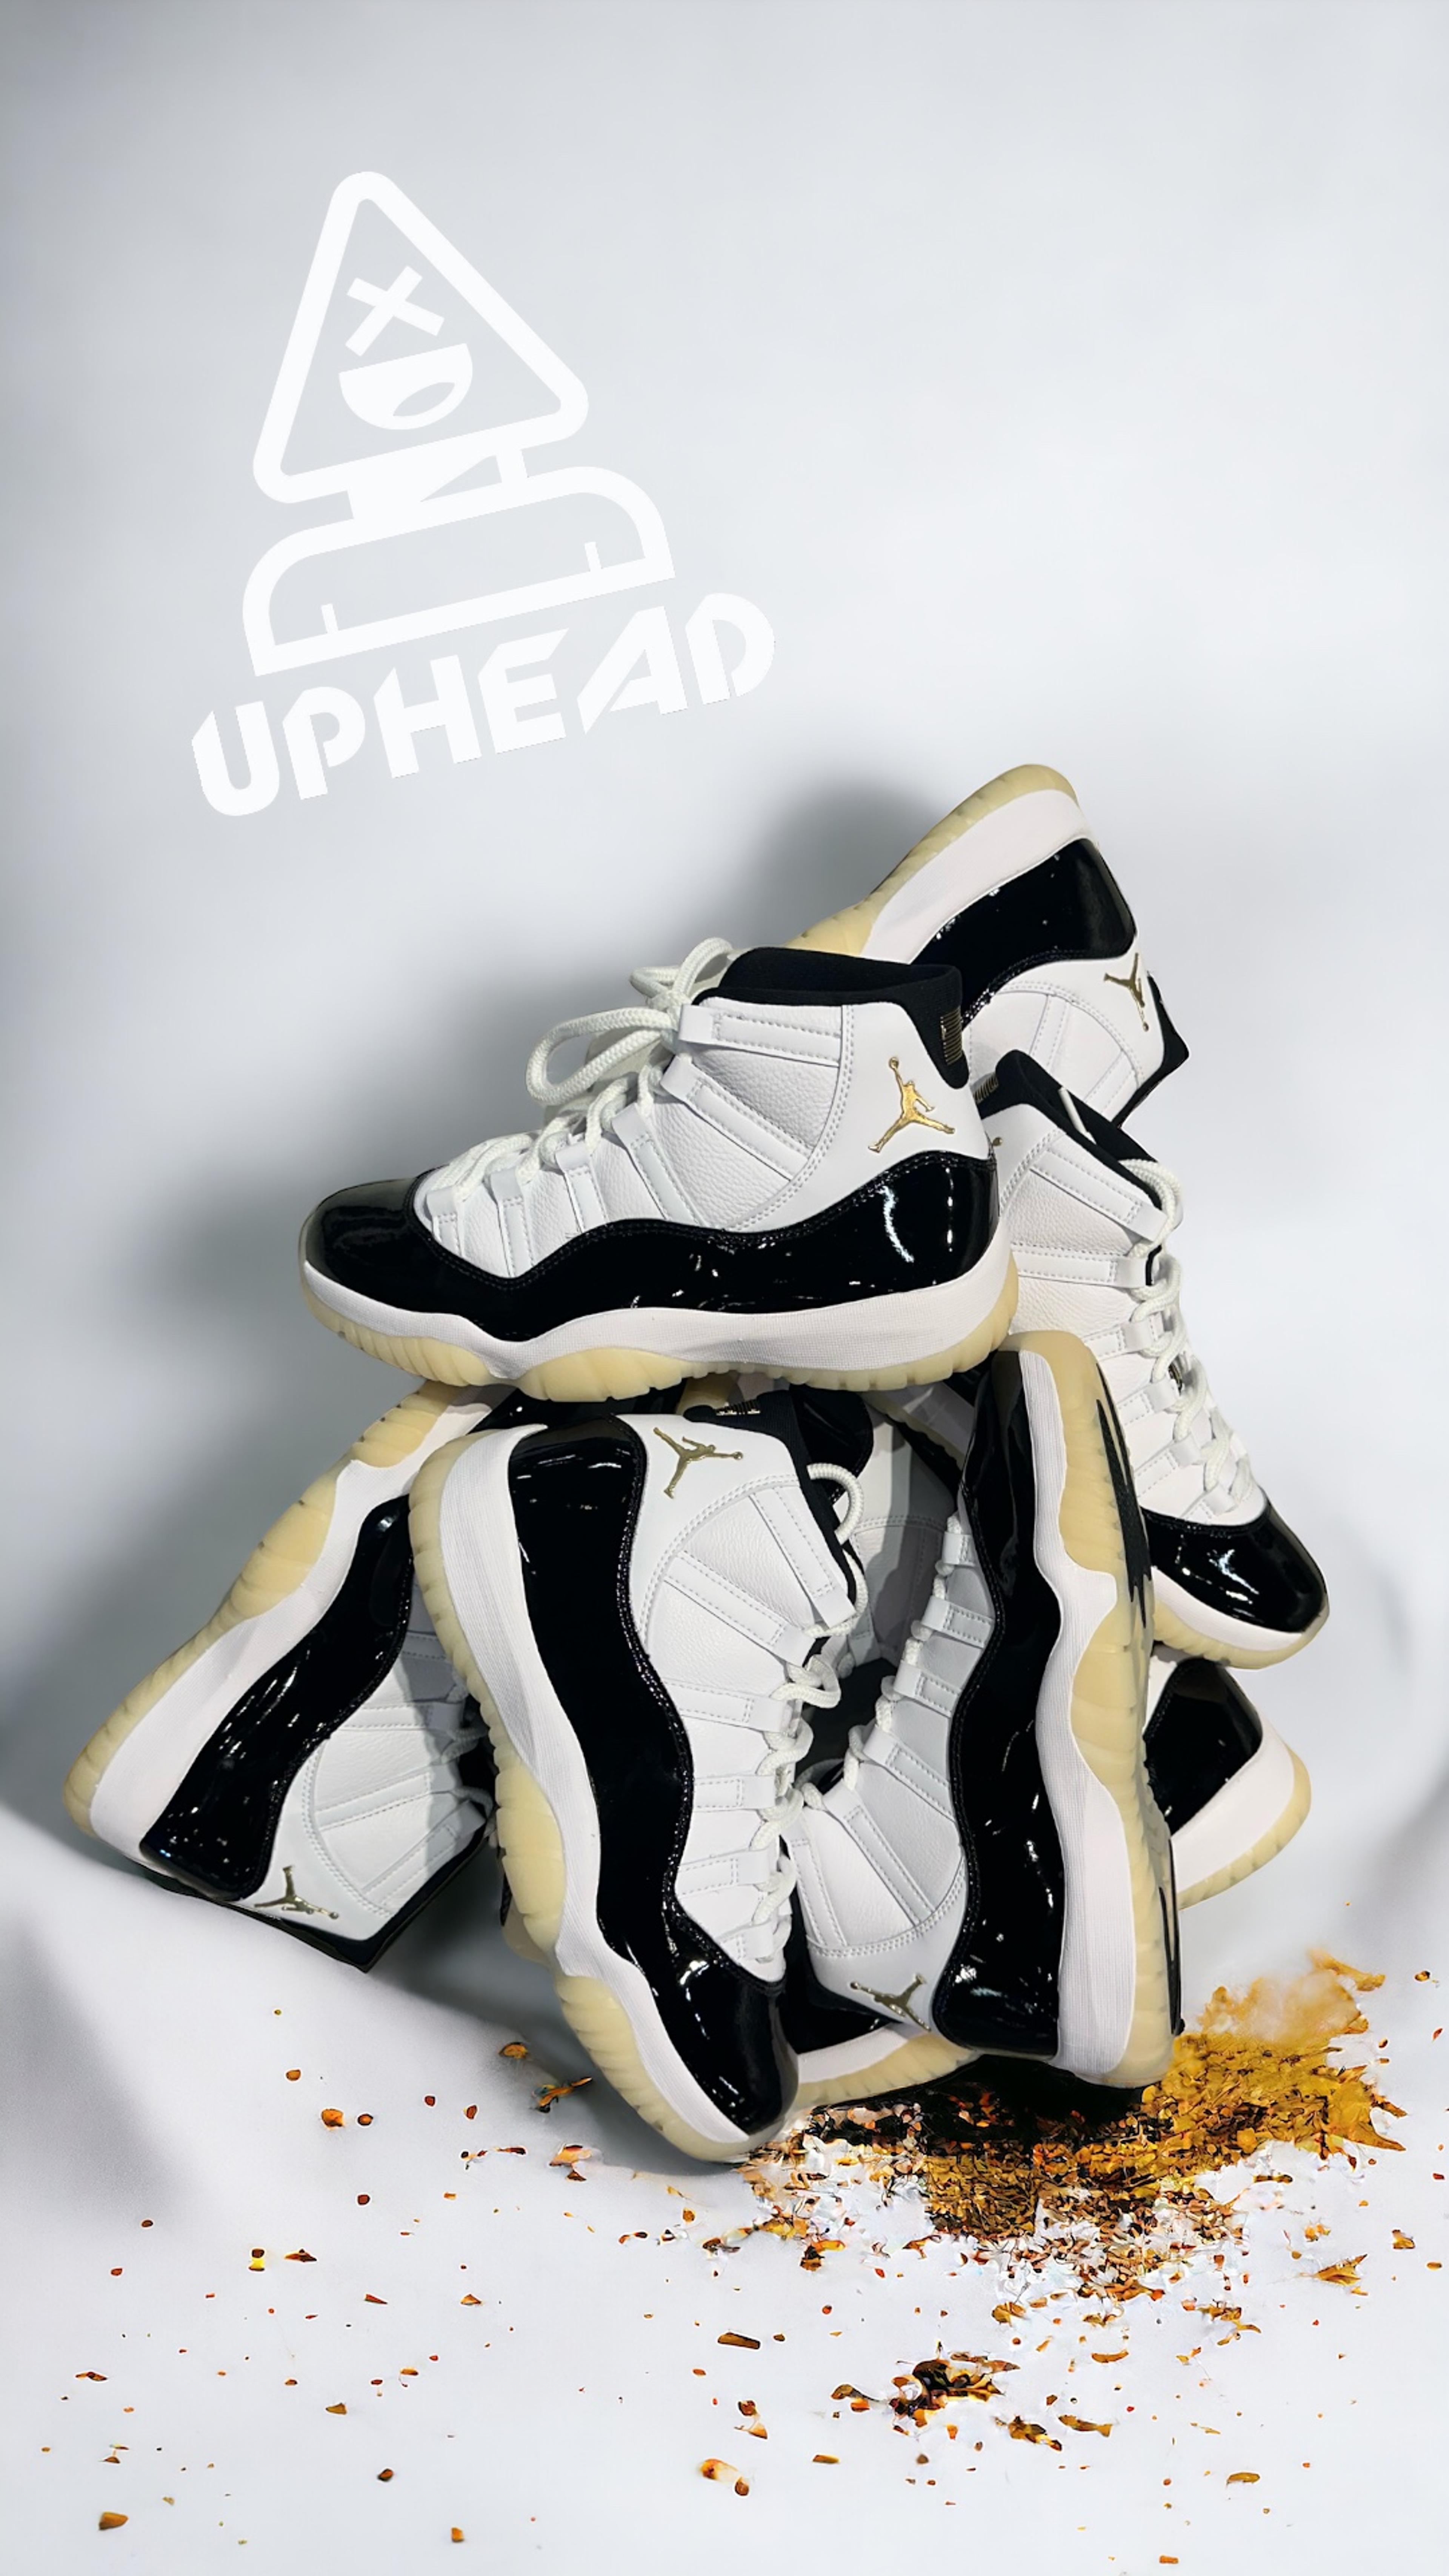 Preview image for the show titled "Uphead: Kickin' It Live" at Today @ 9:00 PM